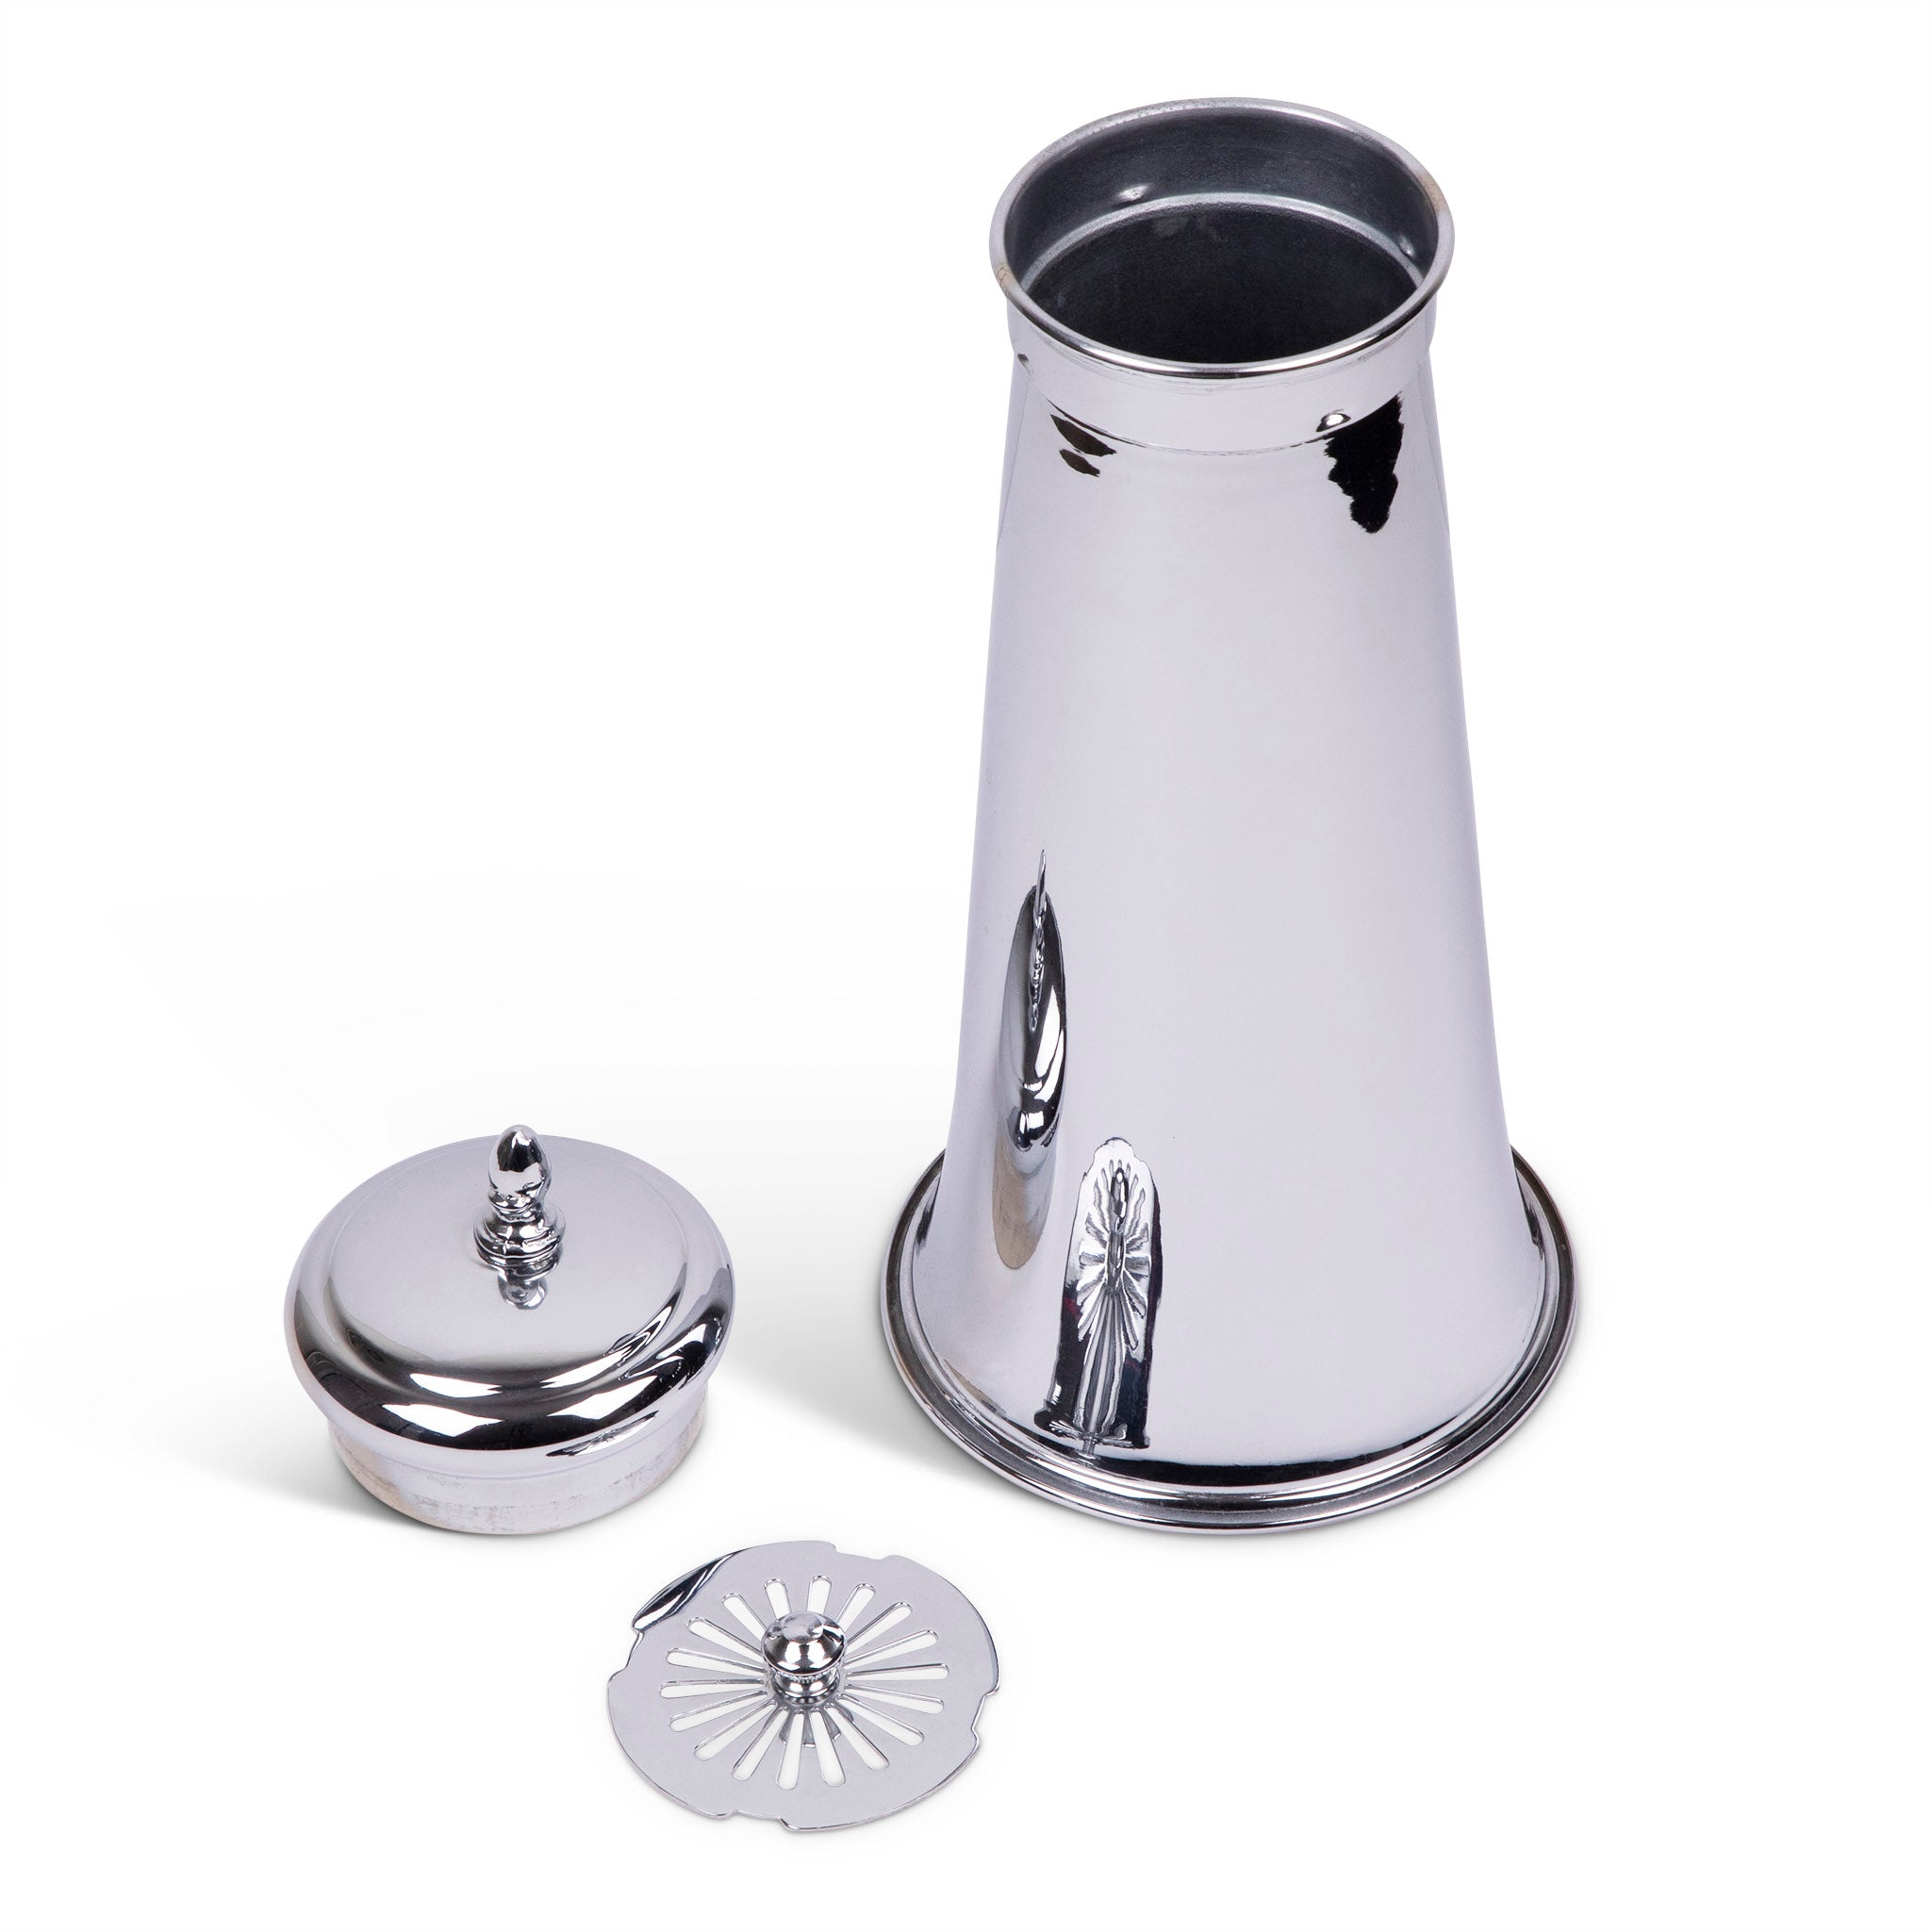 Forman Brothers Chrome Lighthouse Cocktail Shaker